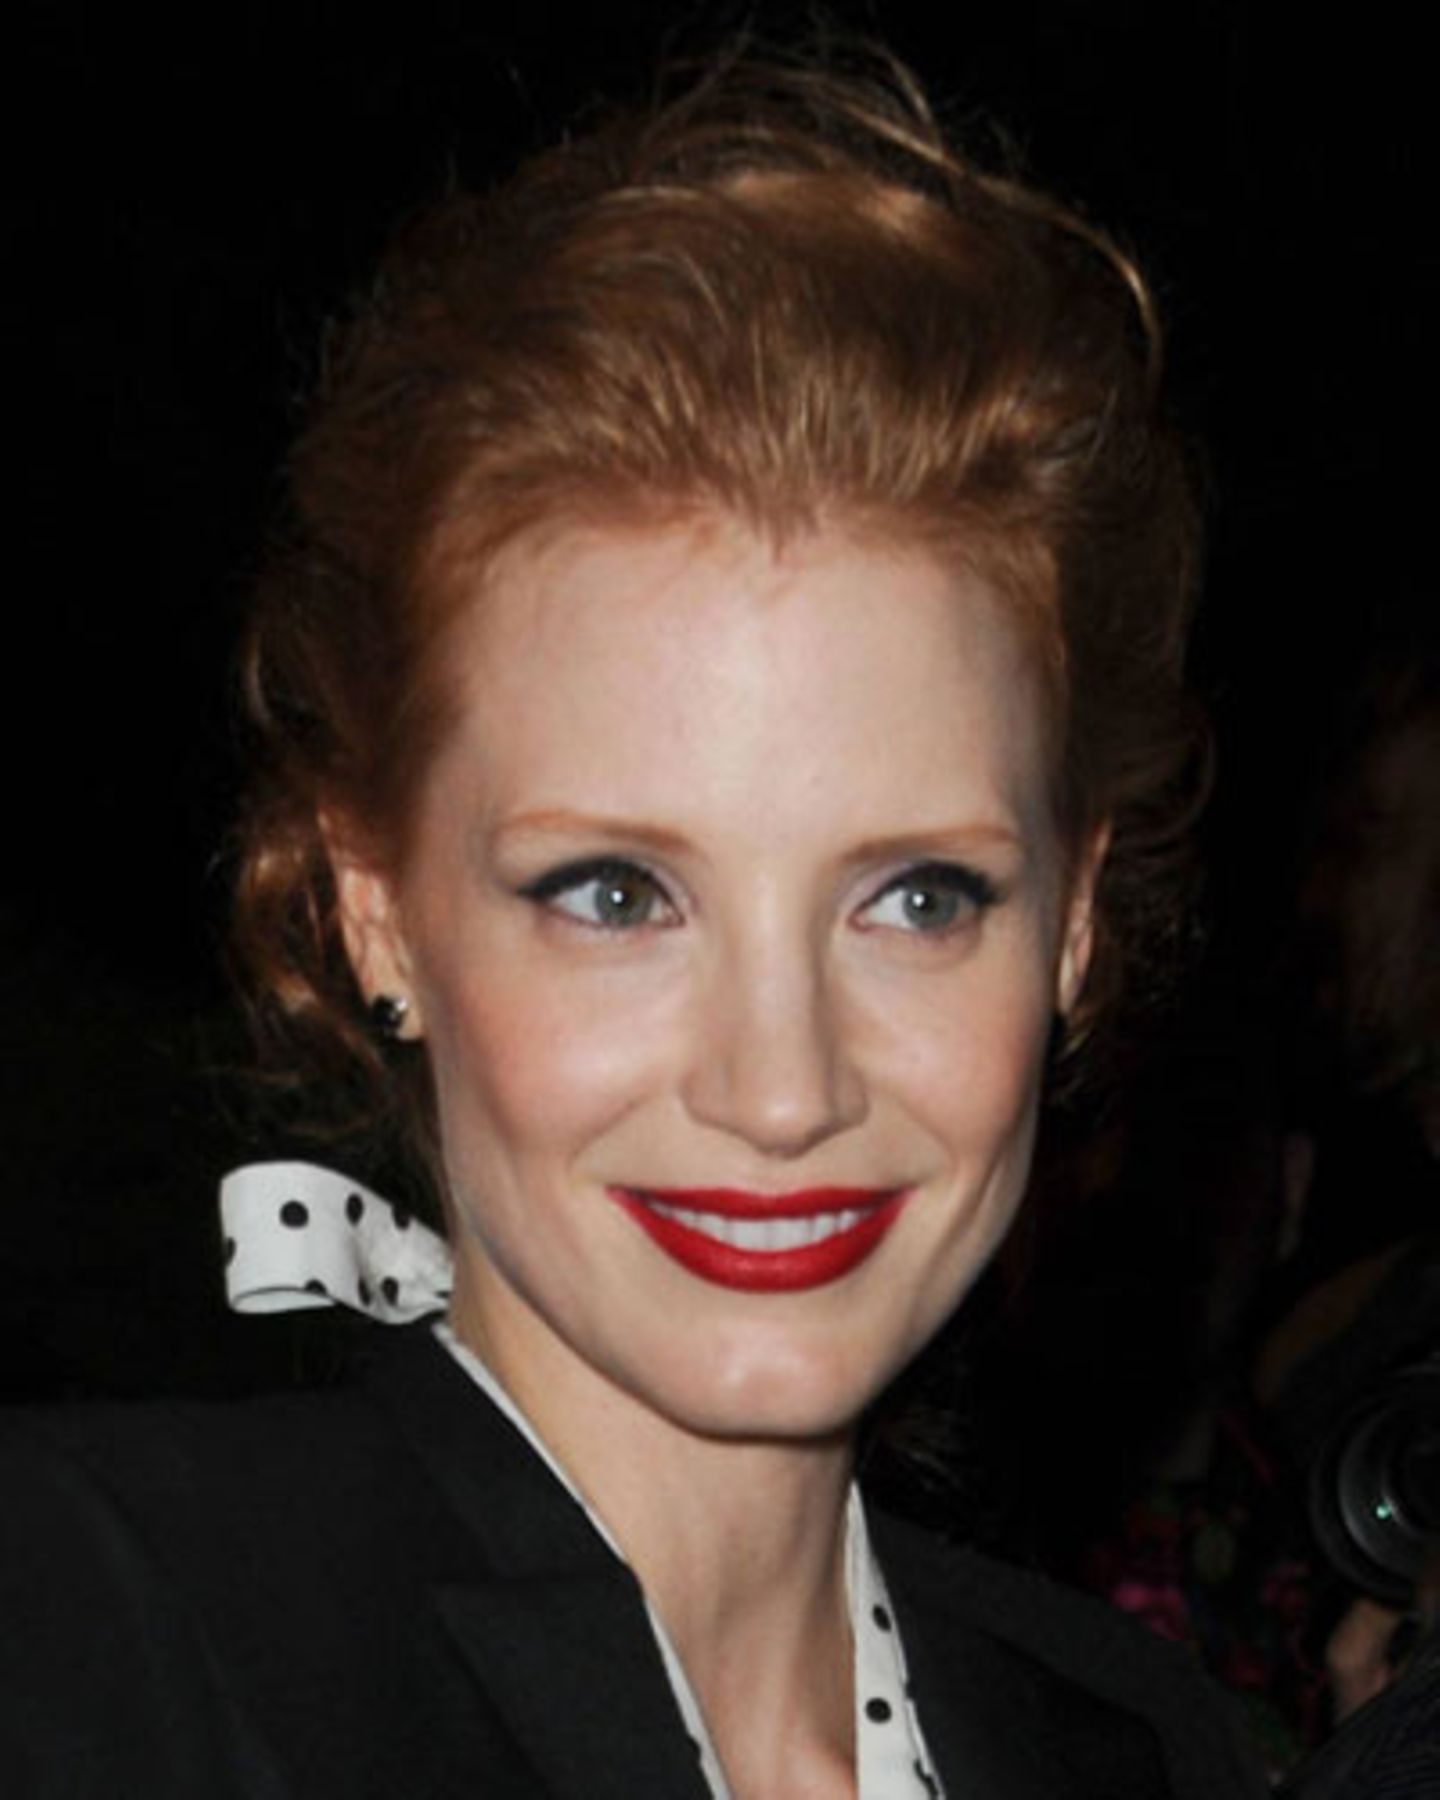 Top-Make-up 2012: Jessica Chastain